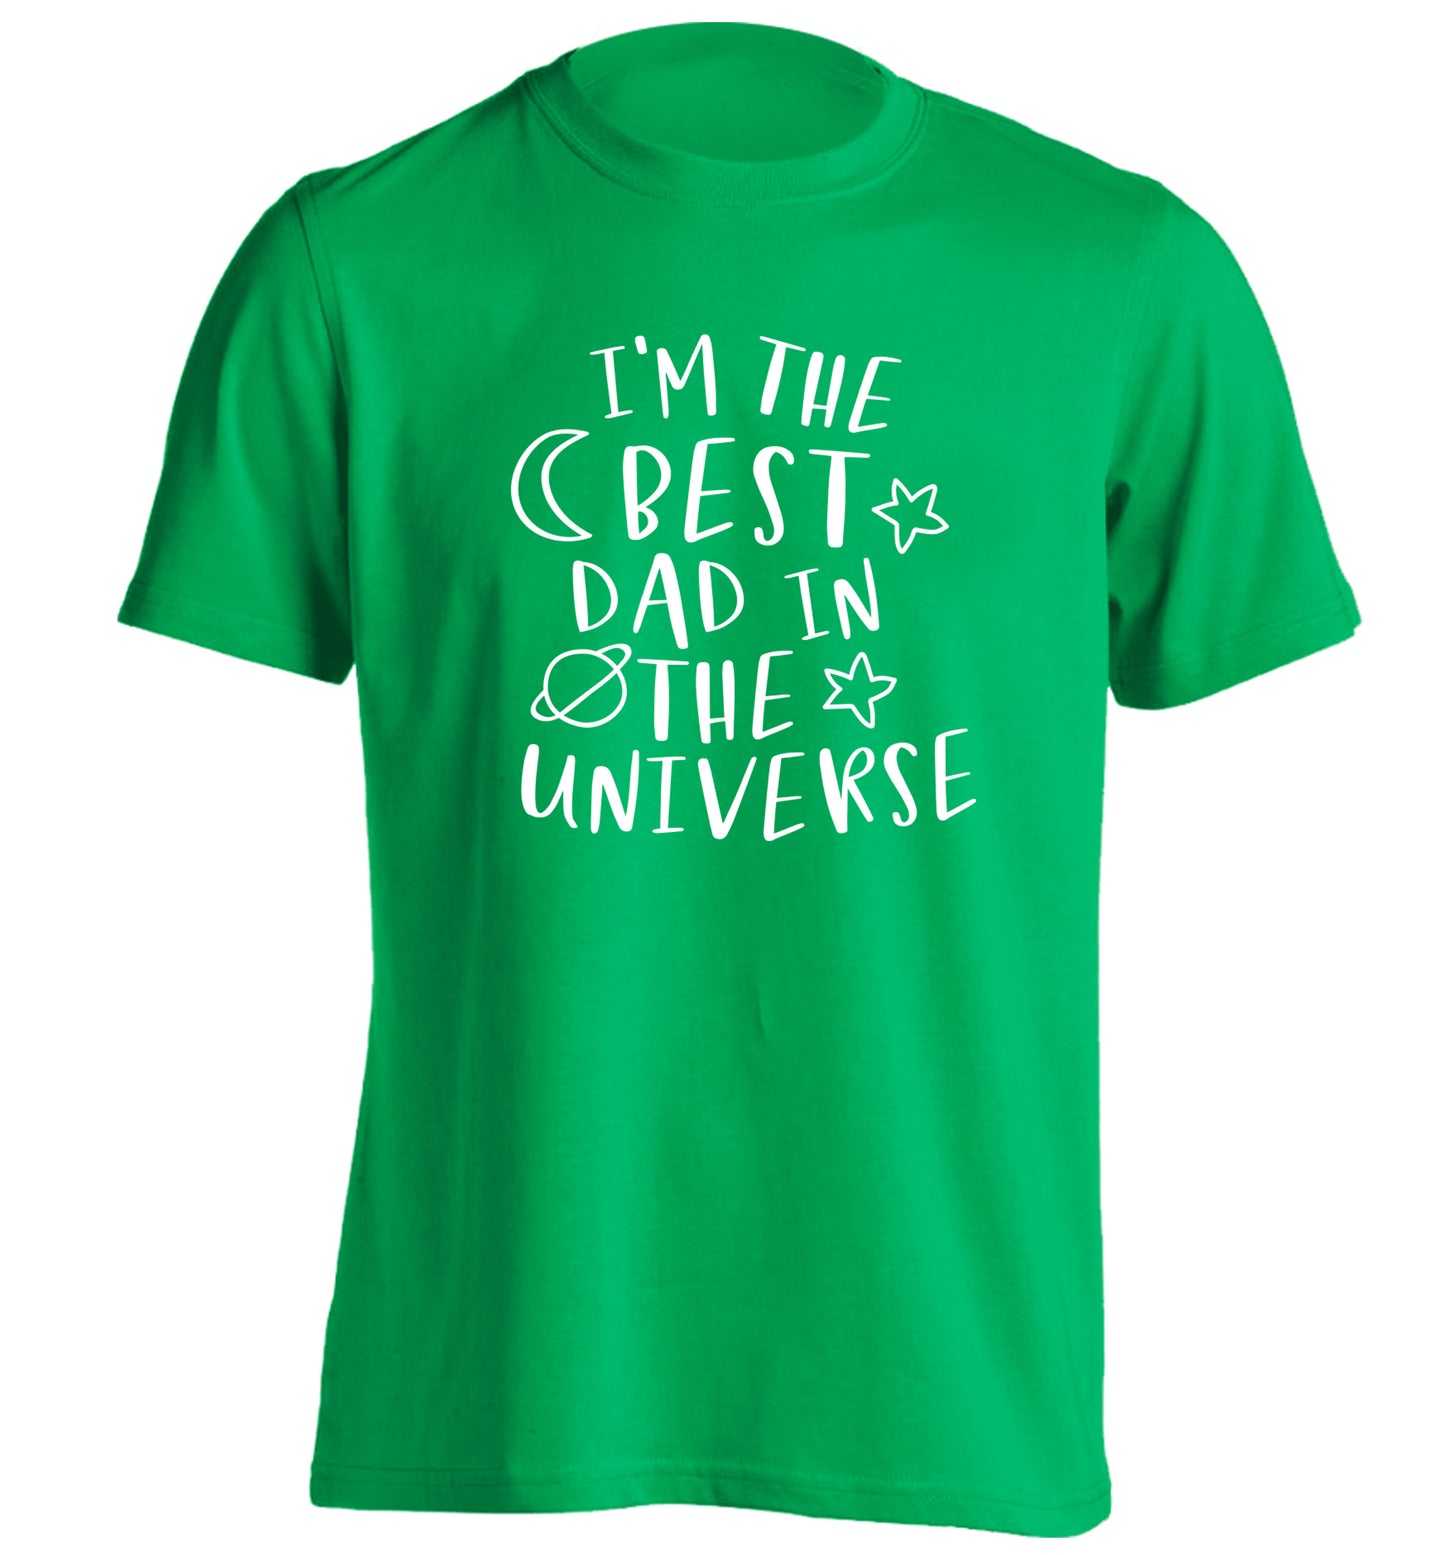 I'm the best dad in the universe adults unisex green Tshirt 2XL